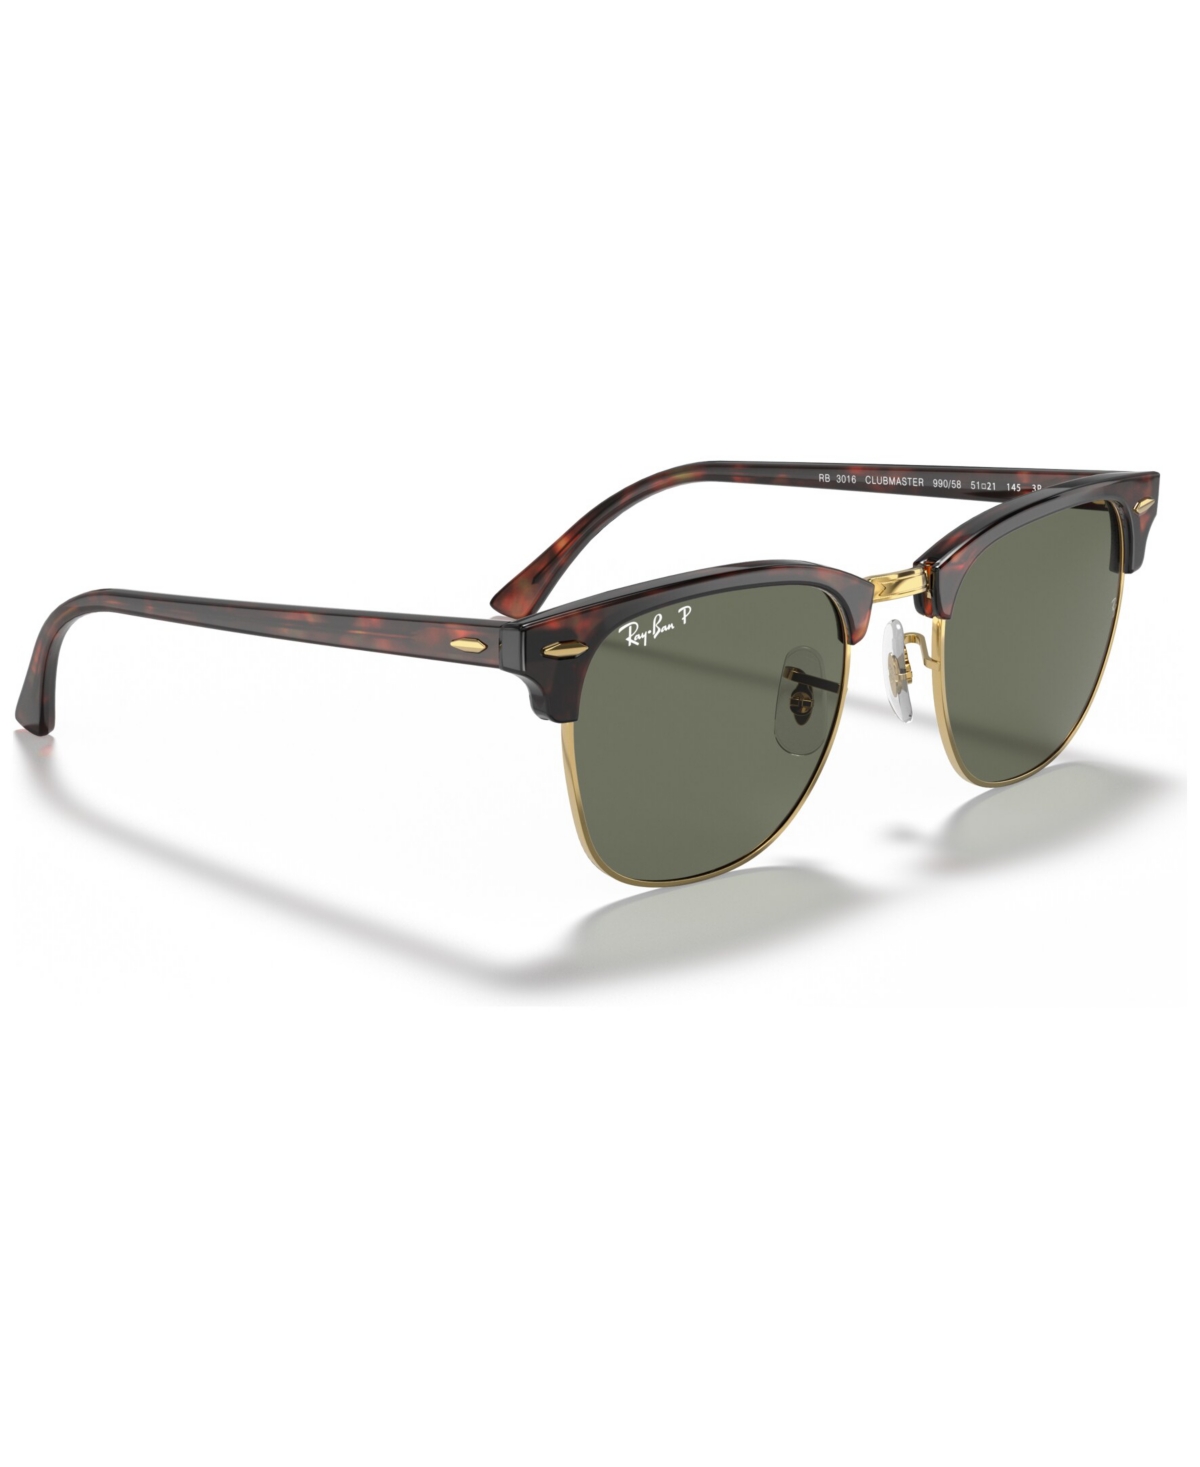 Ray-Ban Polarized Sunglasses , RB3016 CLUBMASTER & Reviews - Sunglasses by  Sunglass Hut - Handbags & Accessories - Macy's